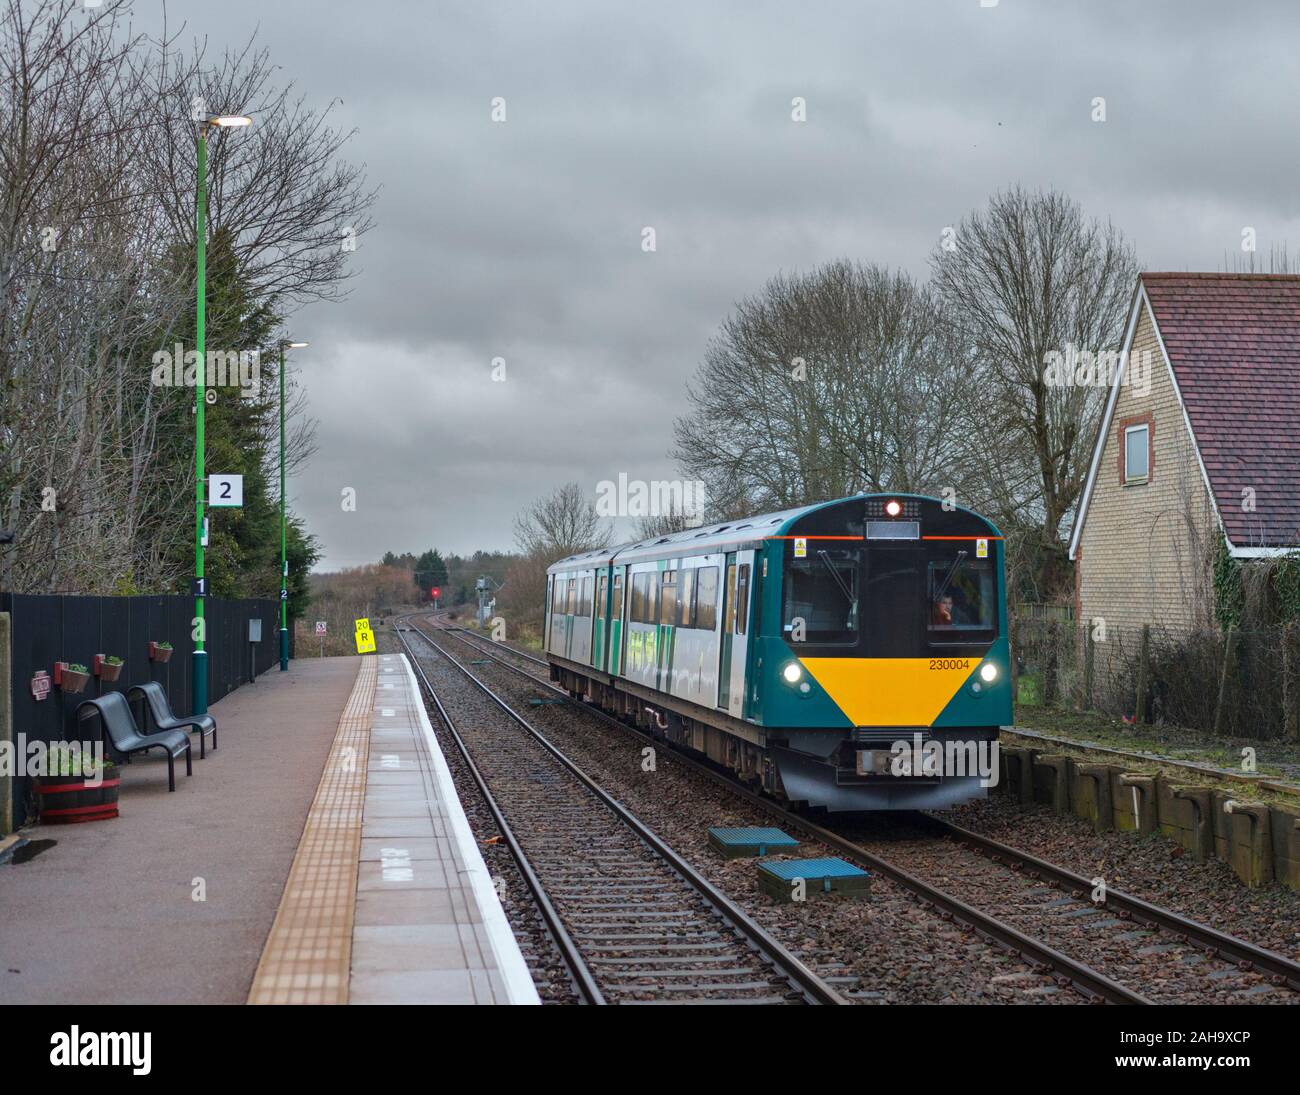 West Midlands Railway Vivarail class 230 230004 at Lidlington on the Bedford - Bletchley Marston vale line Stock Photo